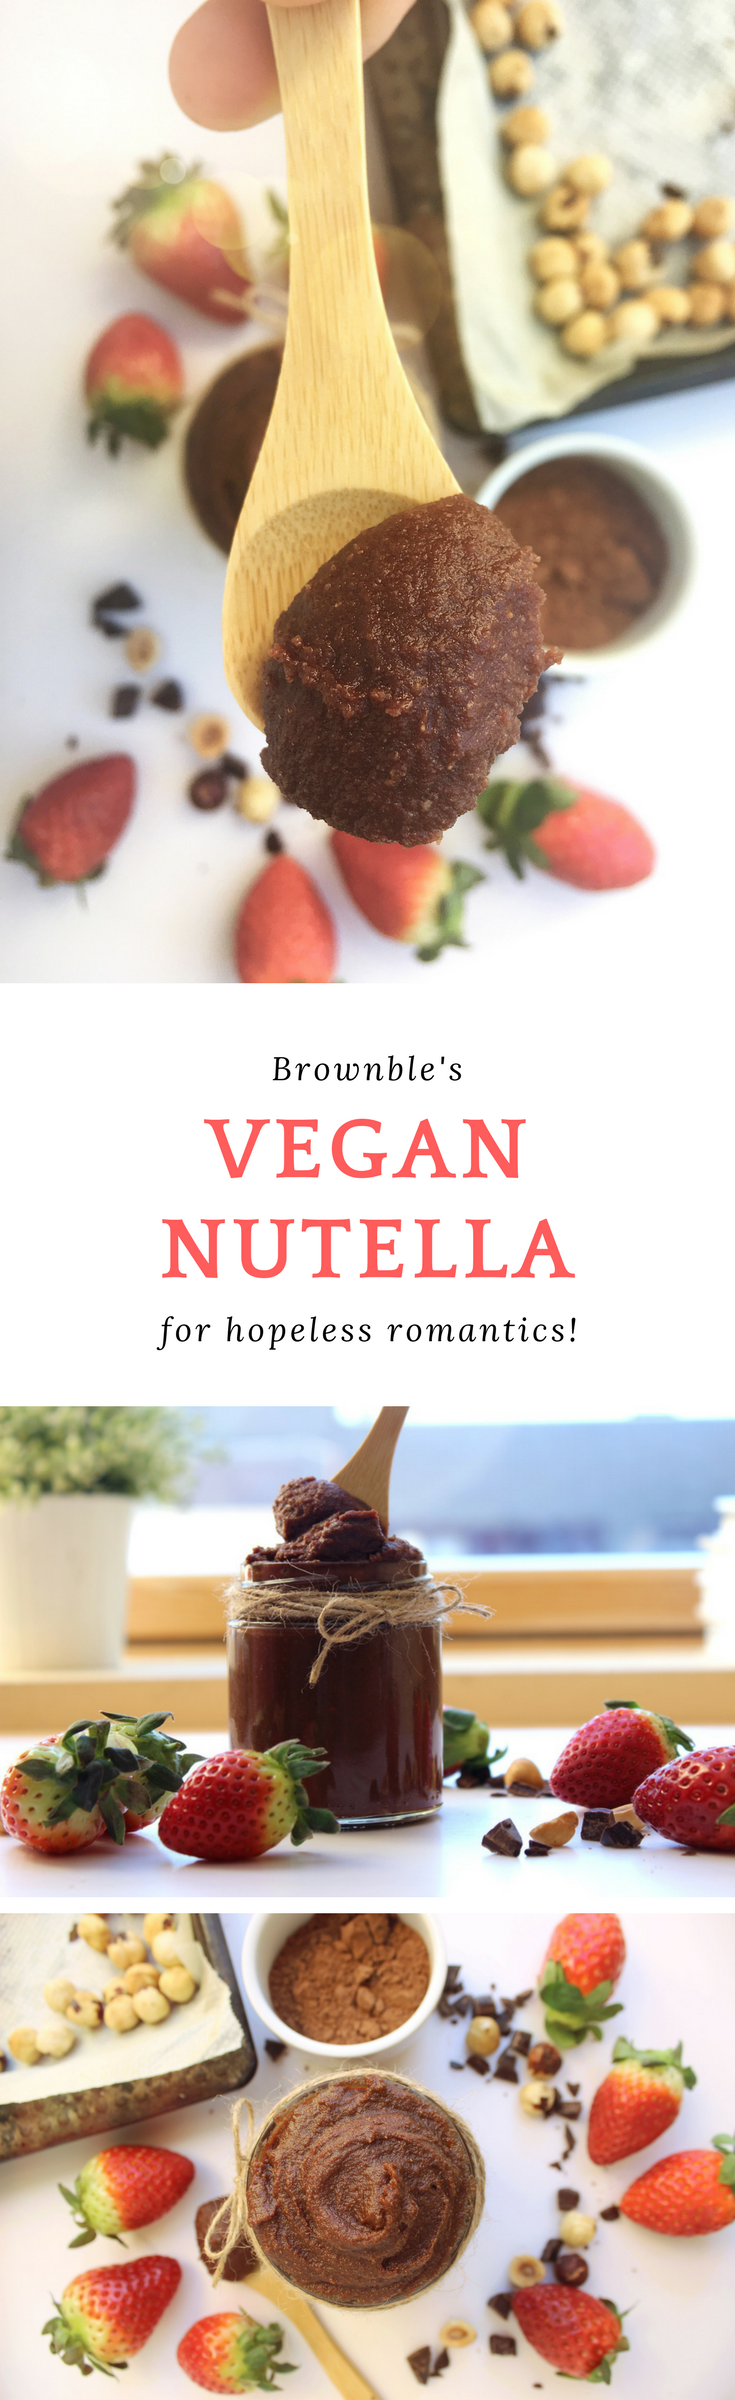 The best vegan nutella recipe! So creamy... You'll never guess what the secret ingredient is!